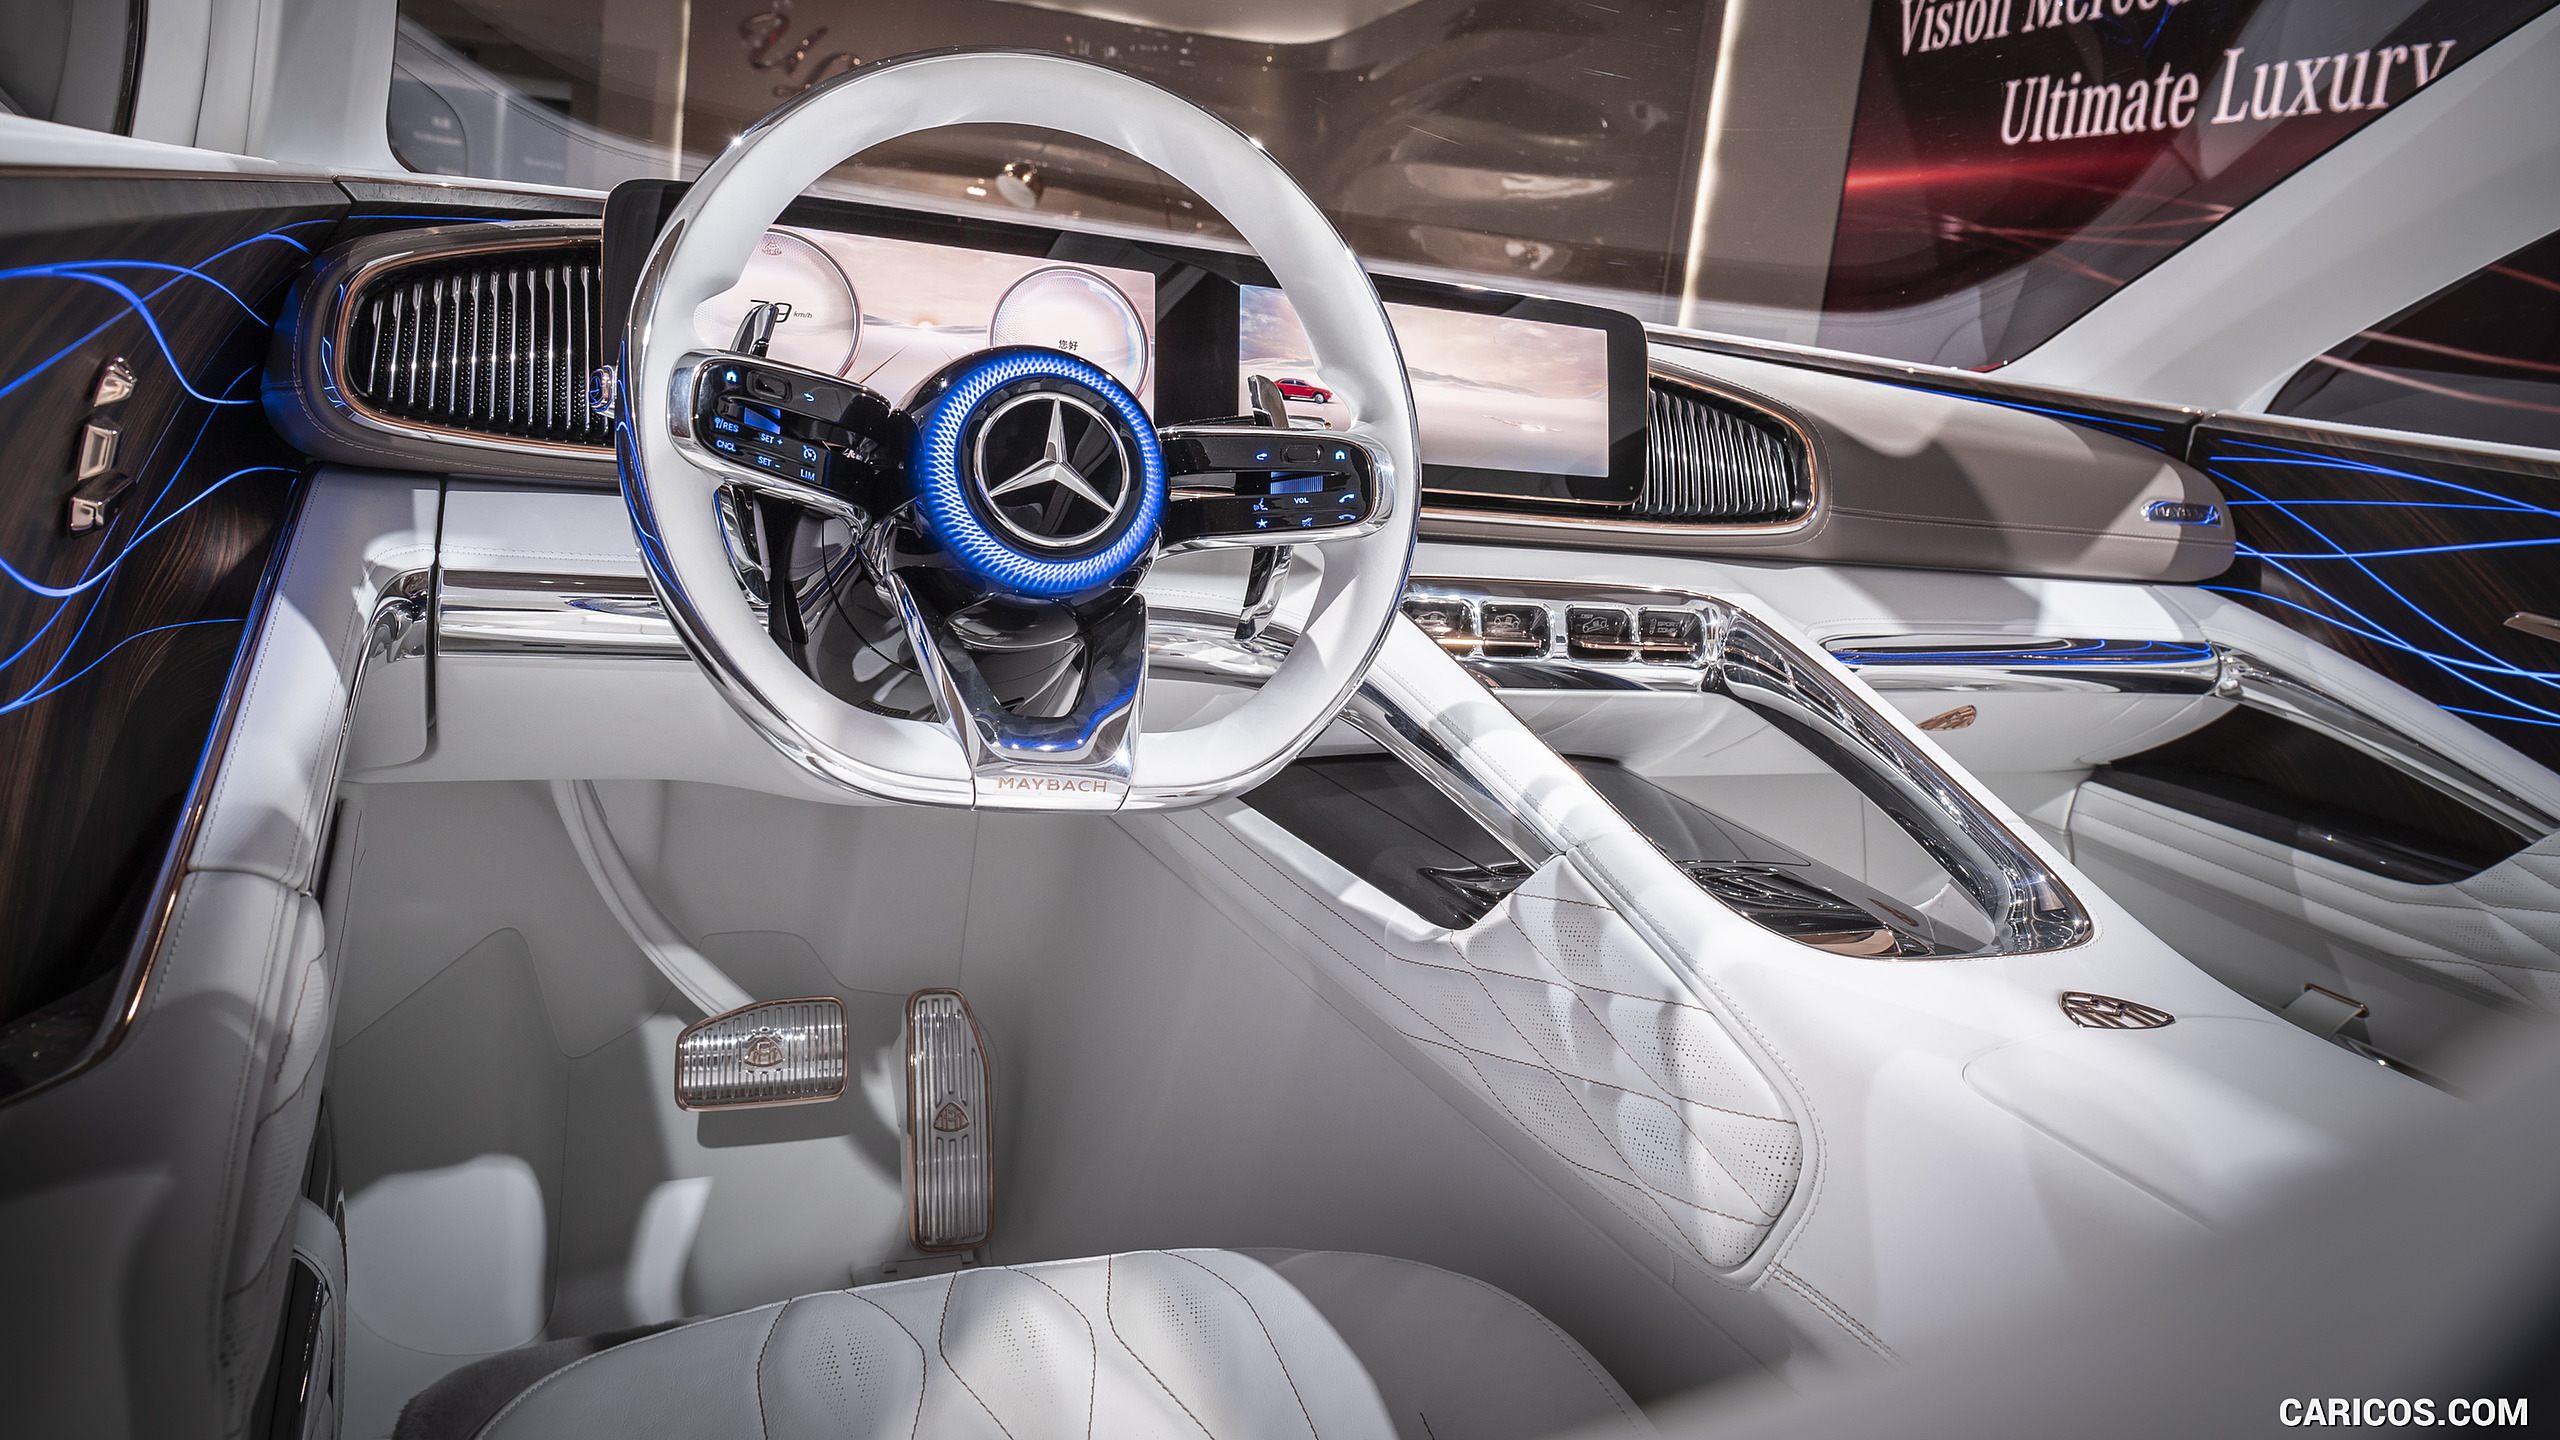 2018 Mercedes-Maybach Vision Ultimate Luxury SUV Concept - Interior, Detail, #27 of 41